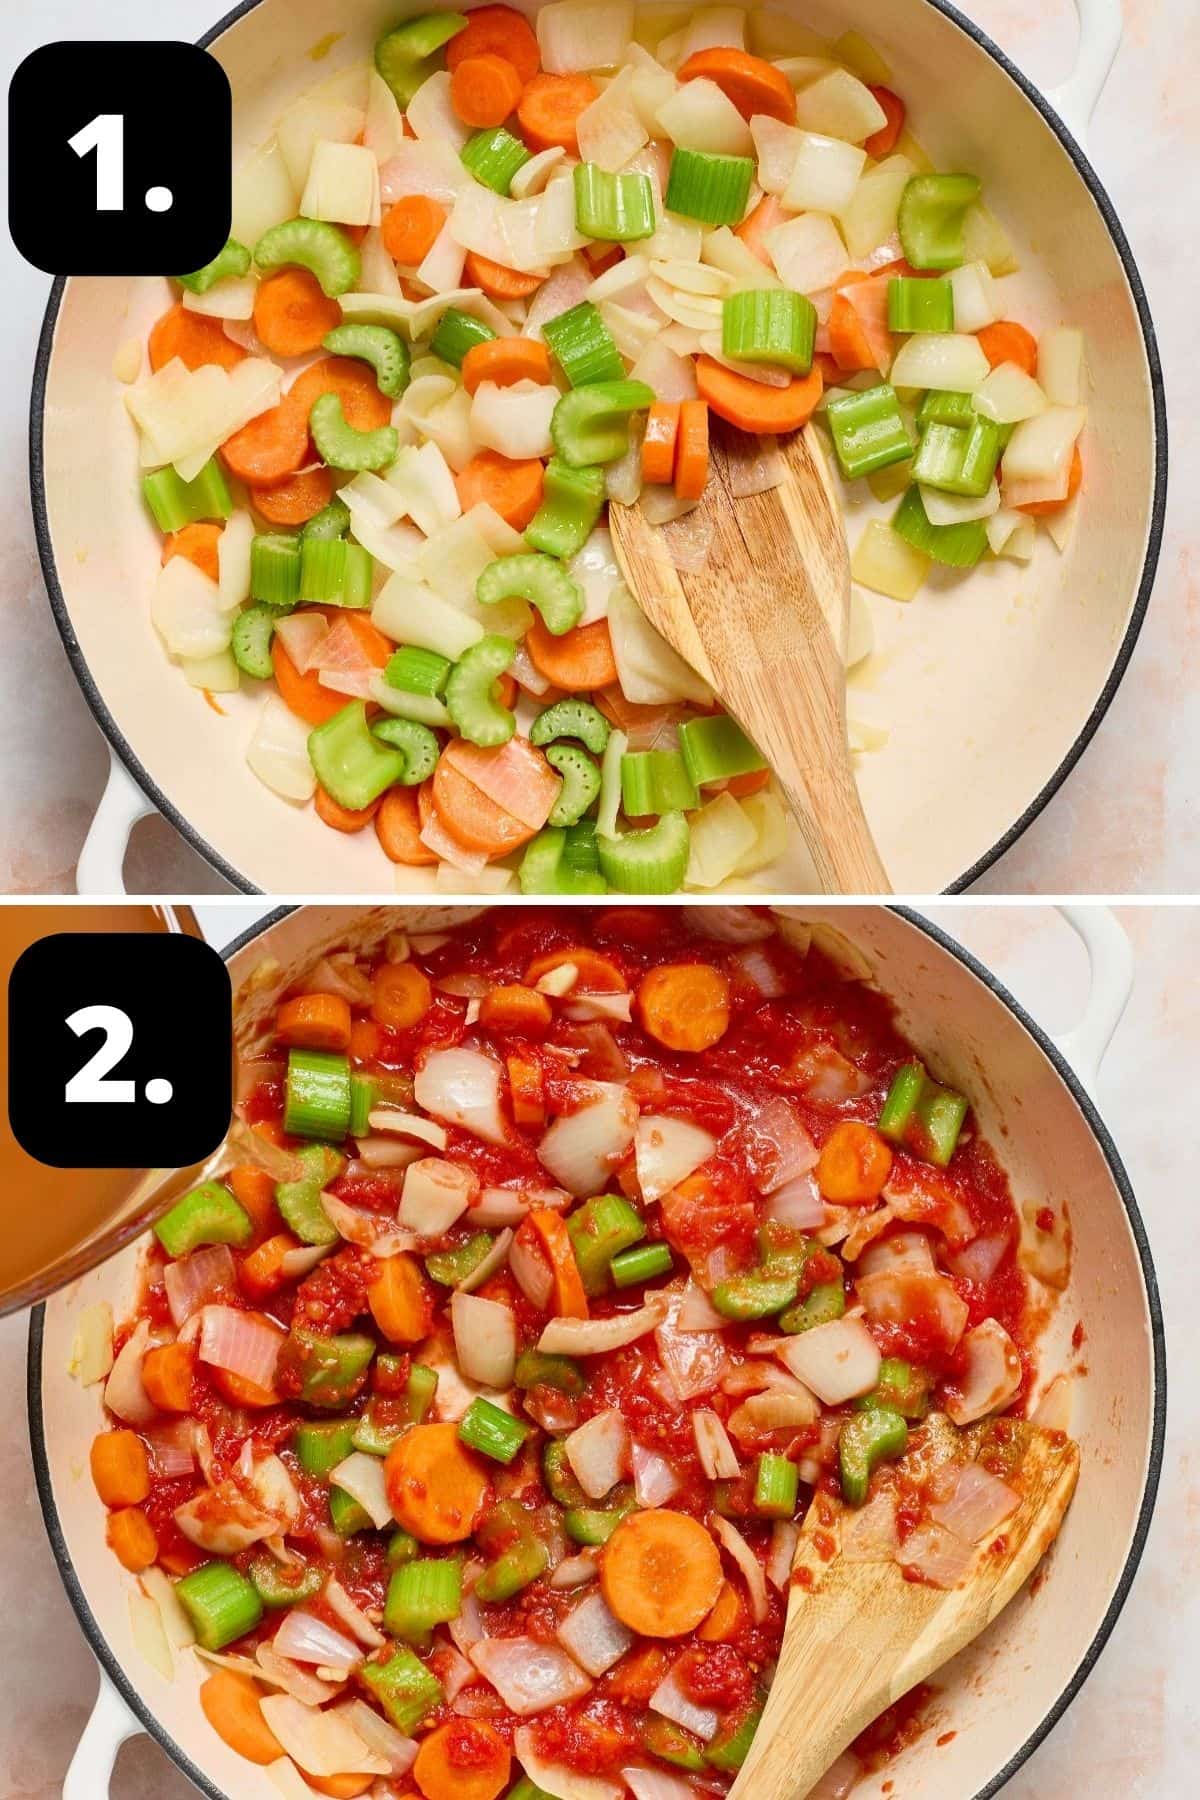 Steps 1-2 of preparing this recipe: sautéing the carrot, celery and onion and adding in the tomato.